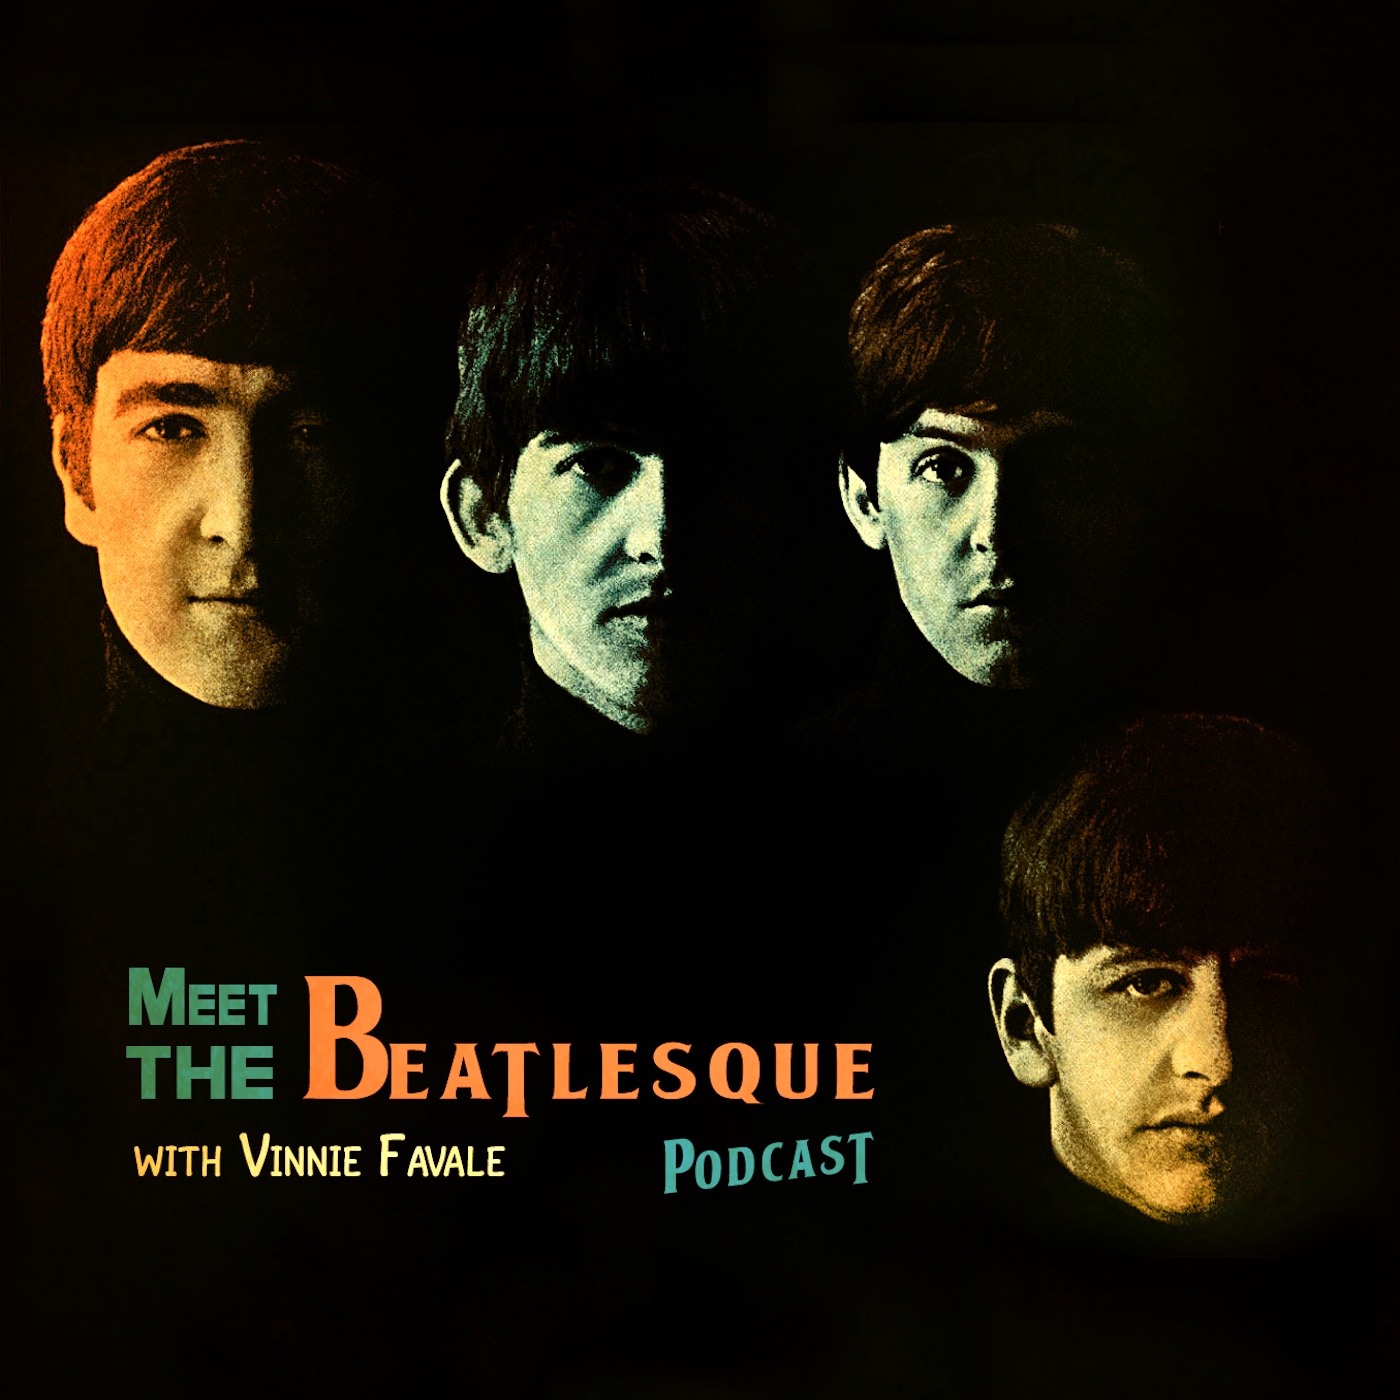 Meet The Beatlesque with Vinnie Favale - Show #6